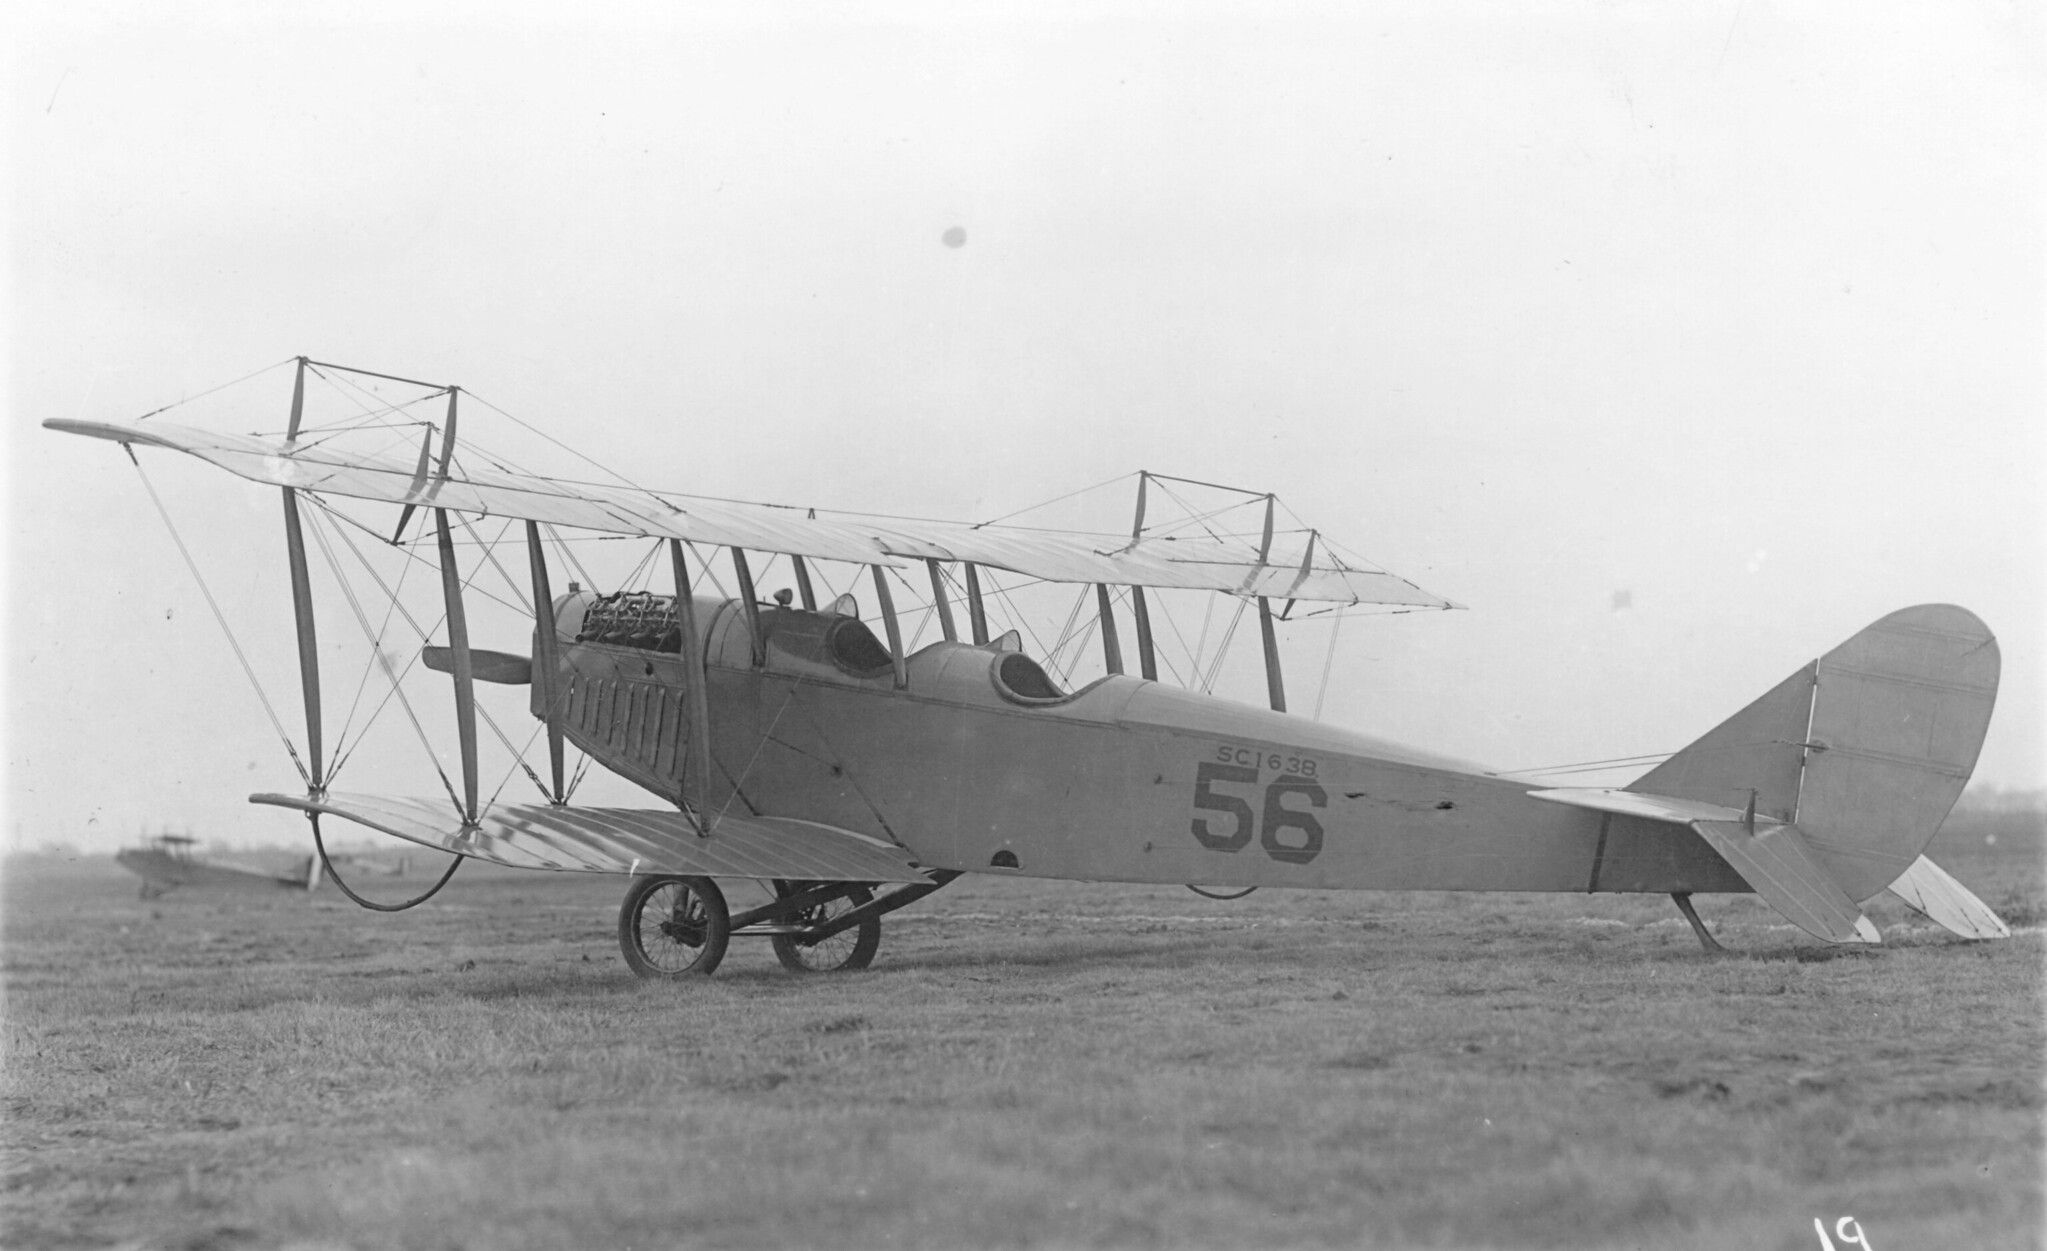 A Curtiss JN-4 Jenny parked in a grass field.